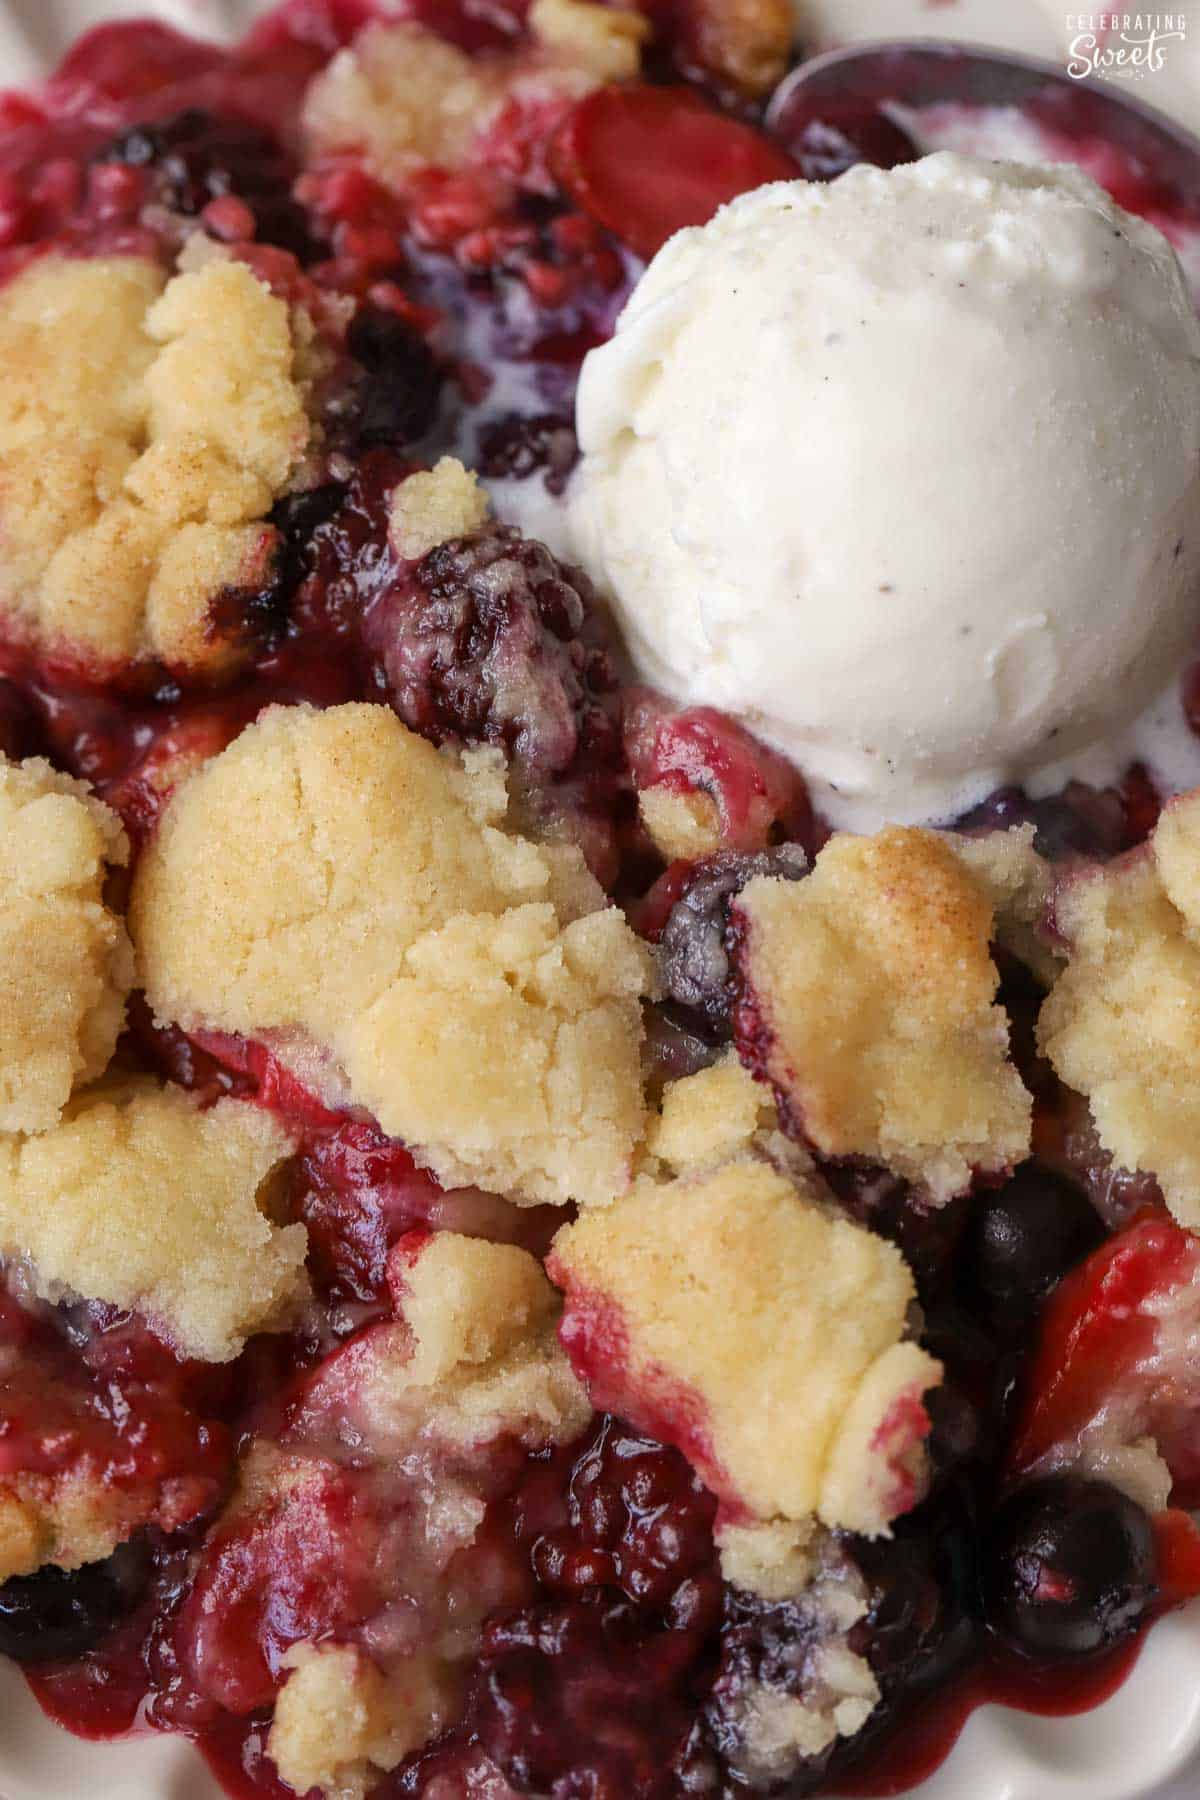 Closeup of berry cobbler topped with vanilla ice cream.